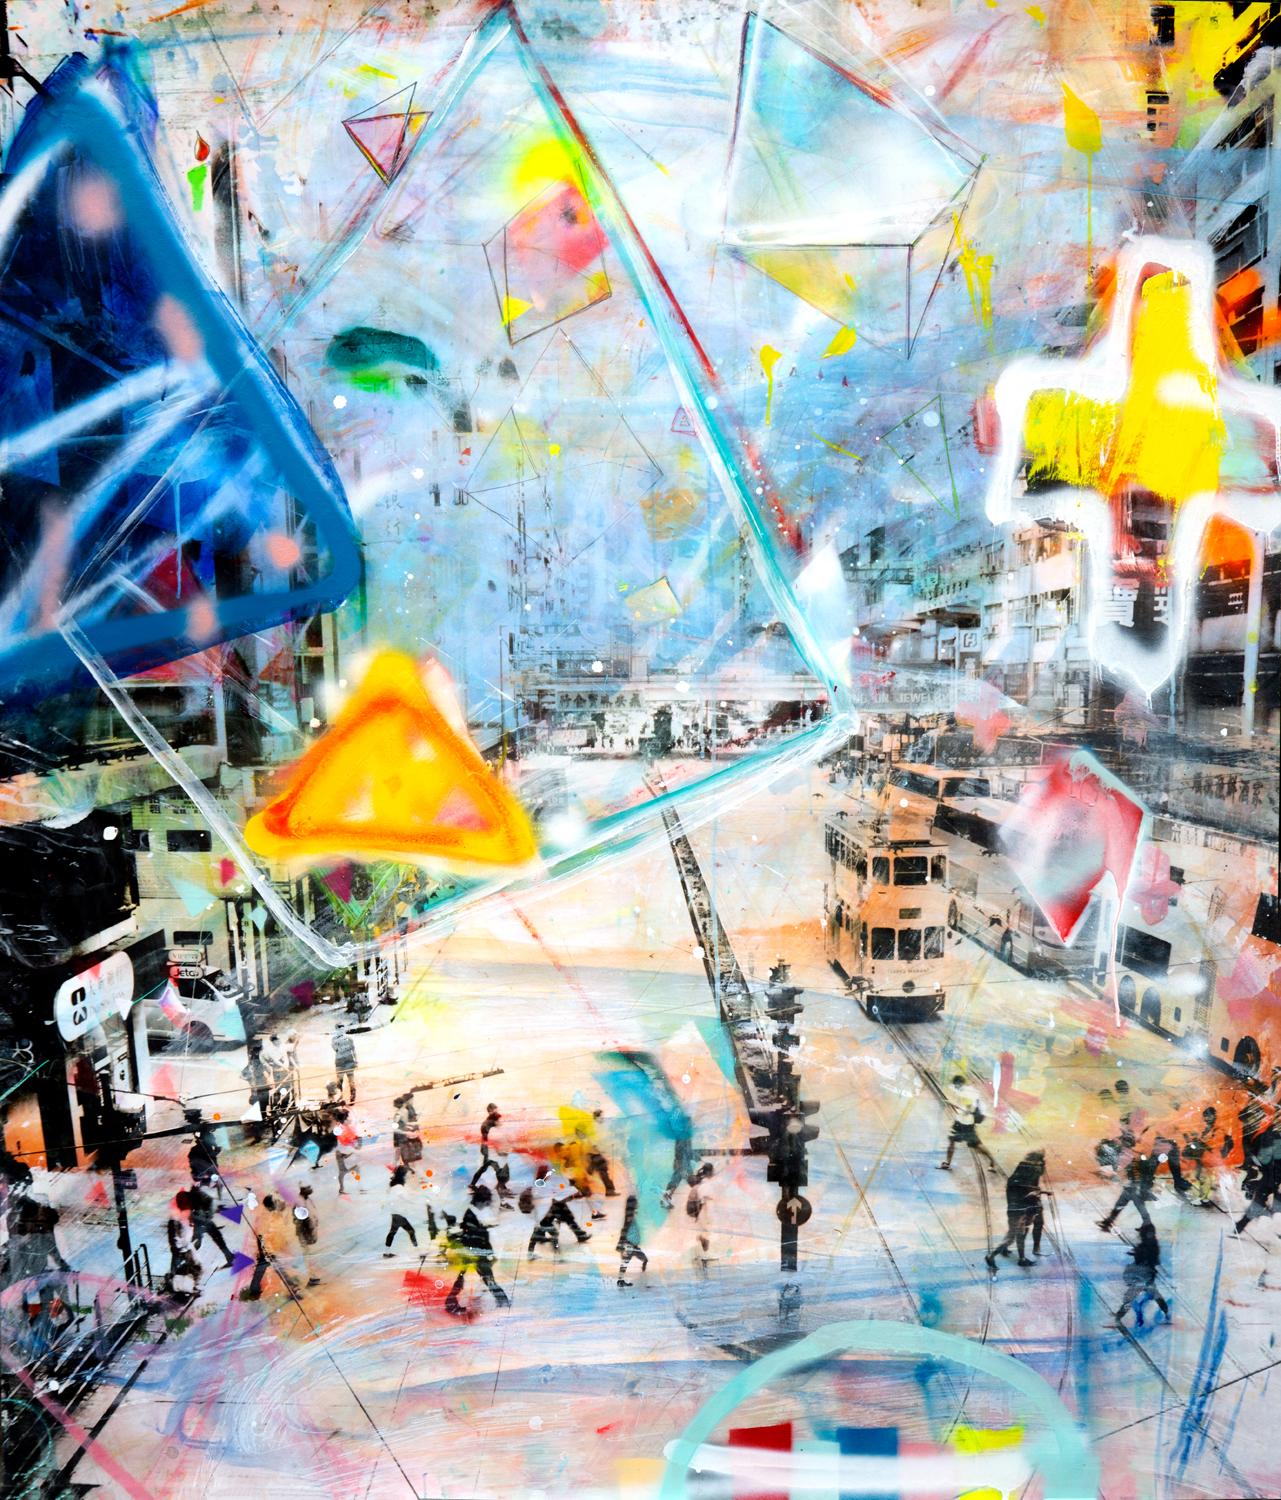 Alberto Sanchez Abstract Photograph - Paradox, Hand-painted photography, bold colorful abstract New York urban scene